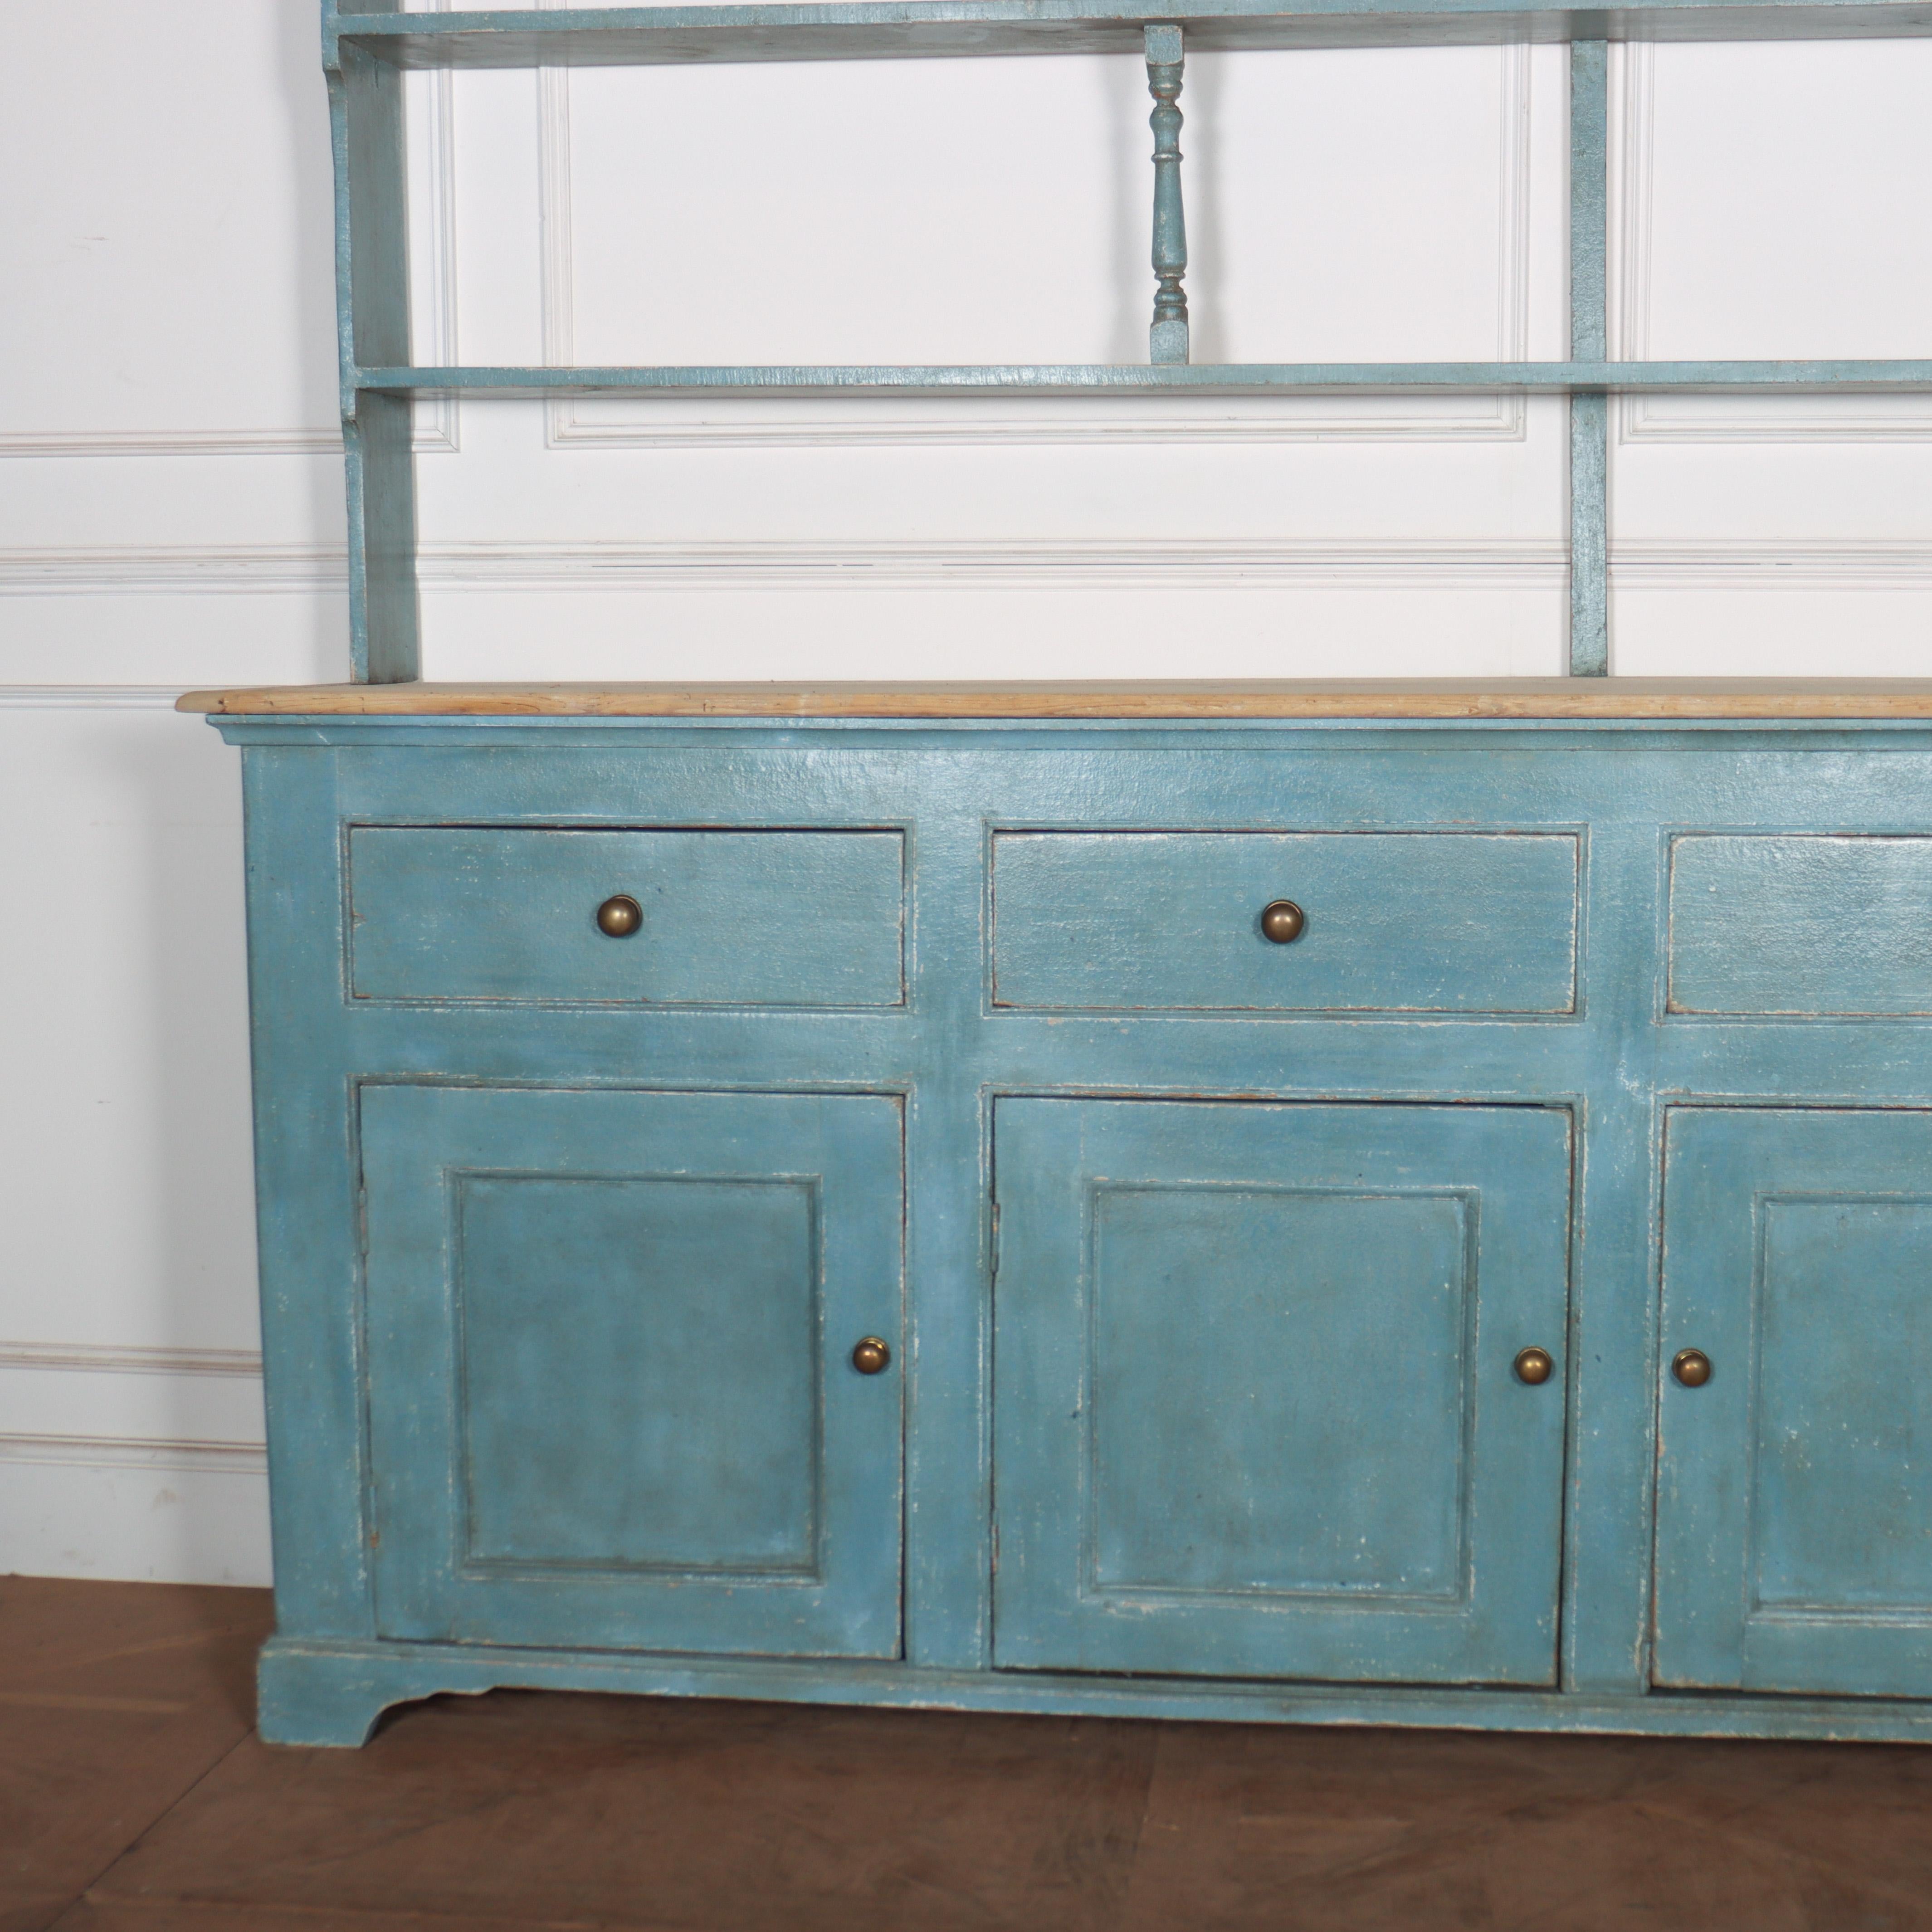 Large 19th C English painted country house dresser. Great storage. 1850.

Height to worktop is 41.5